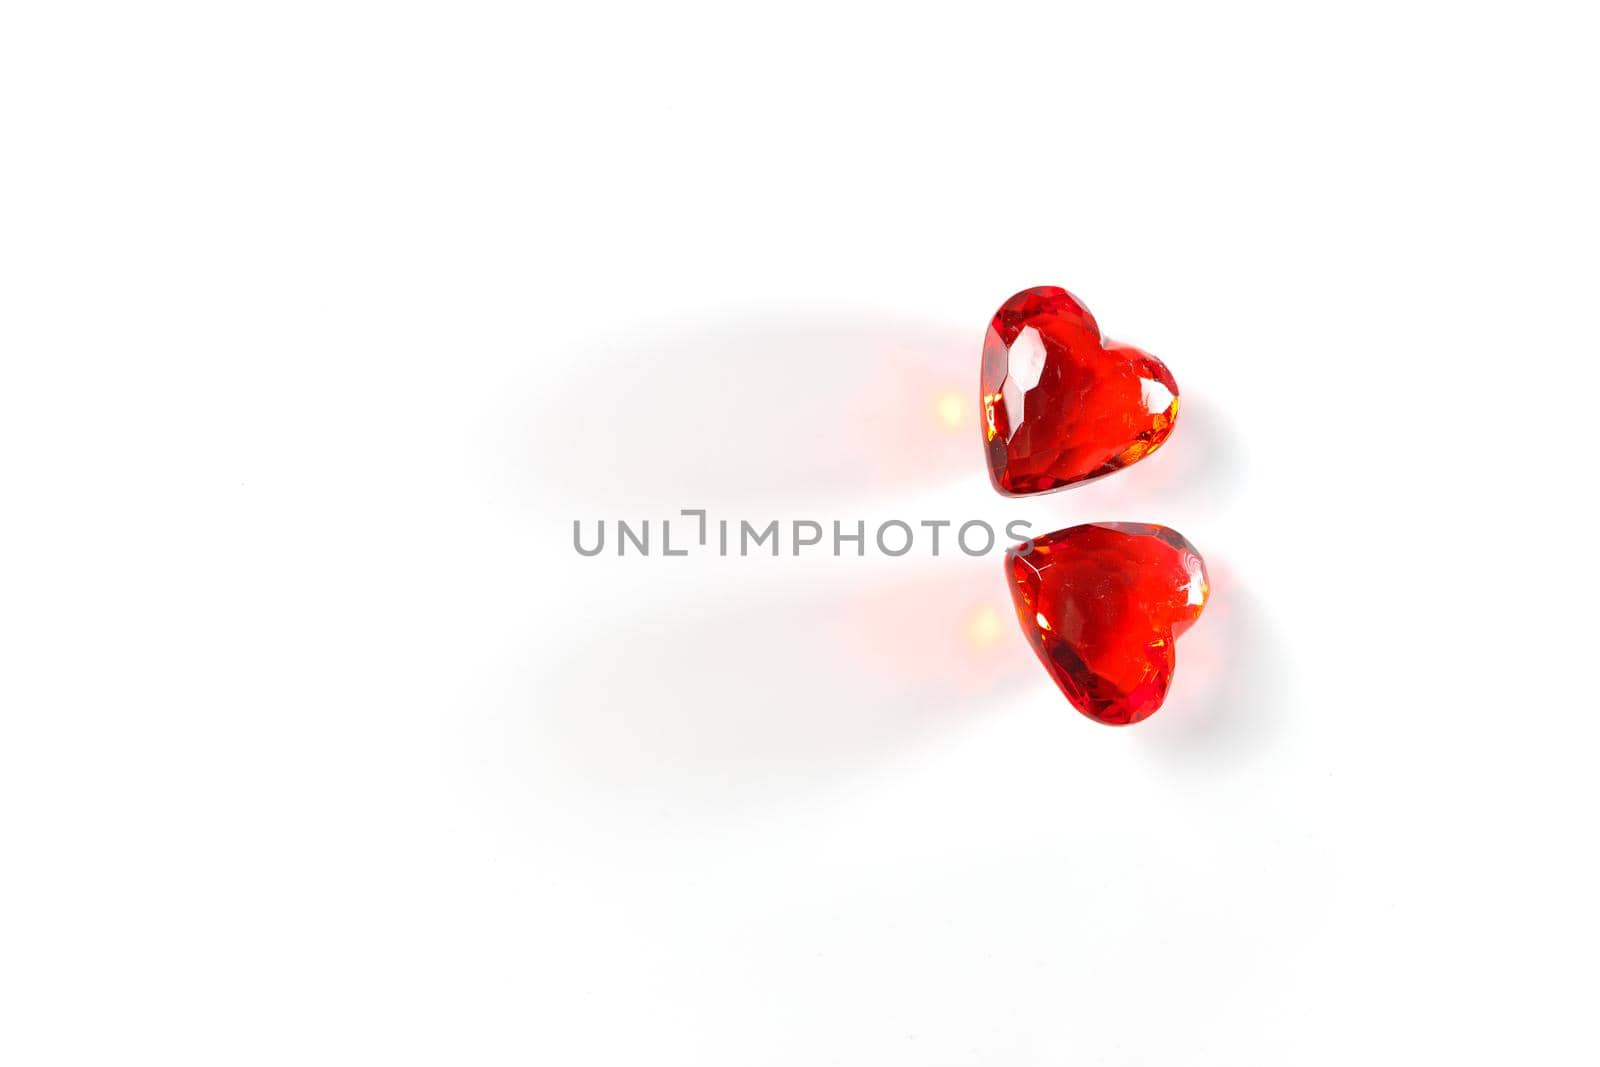 Directly Above Studio mage of Two Sparkling Red Gemstone Hearts, side-by-side, on a White Studio Background. This image has plenty of White Copy Space.